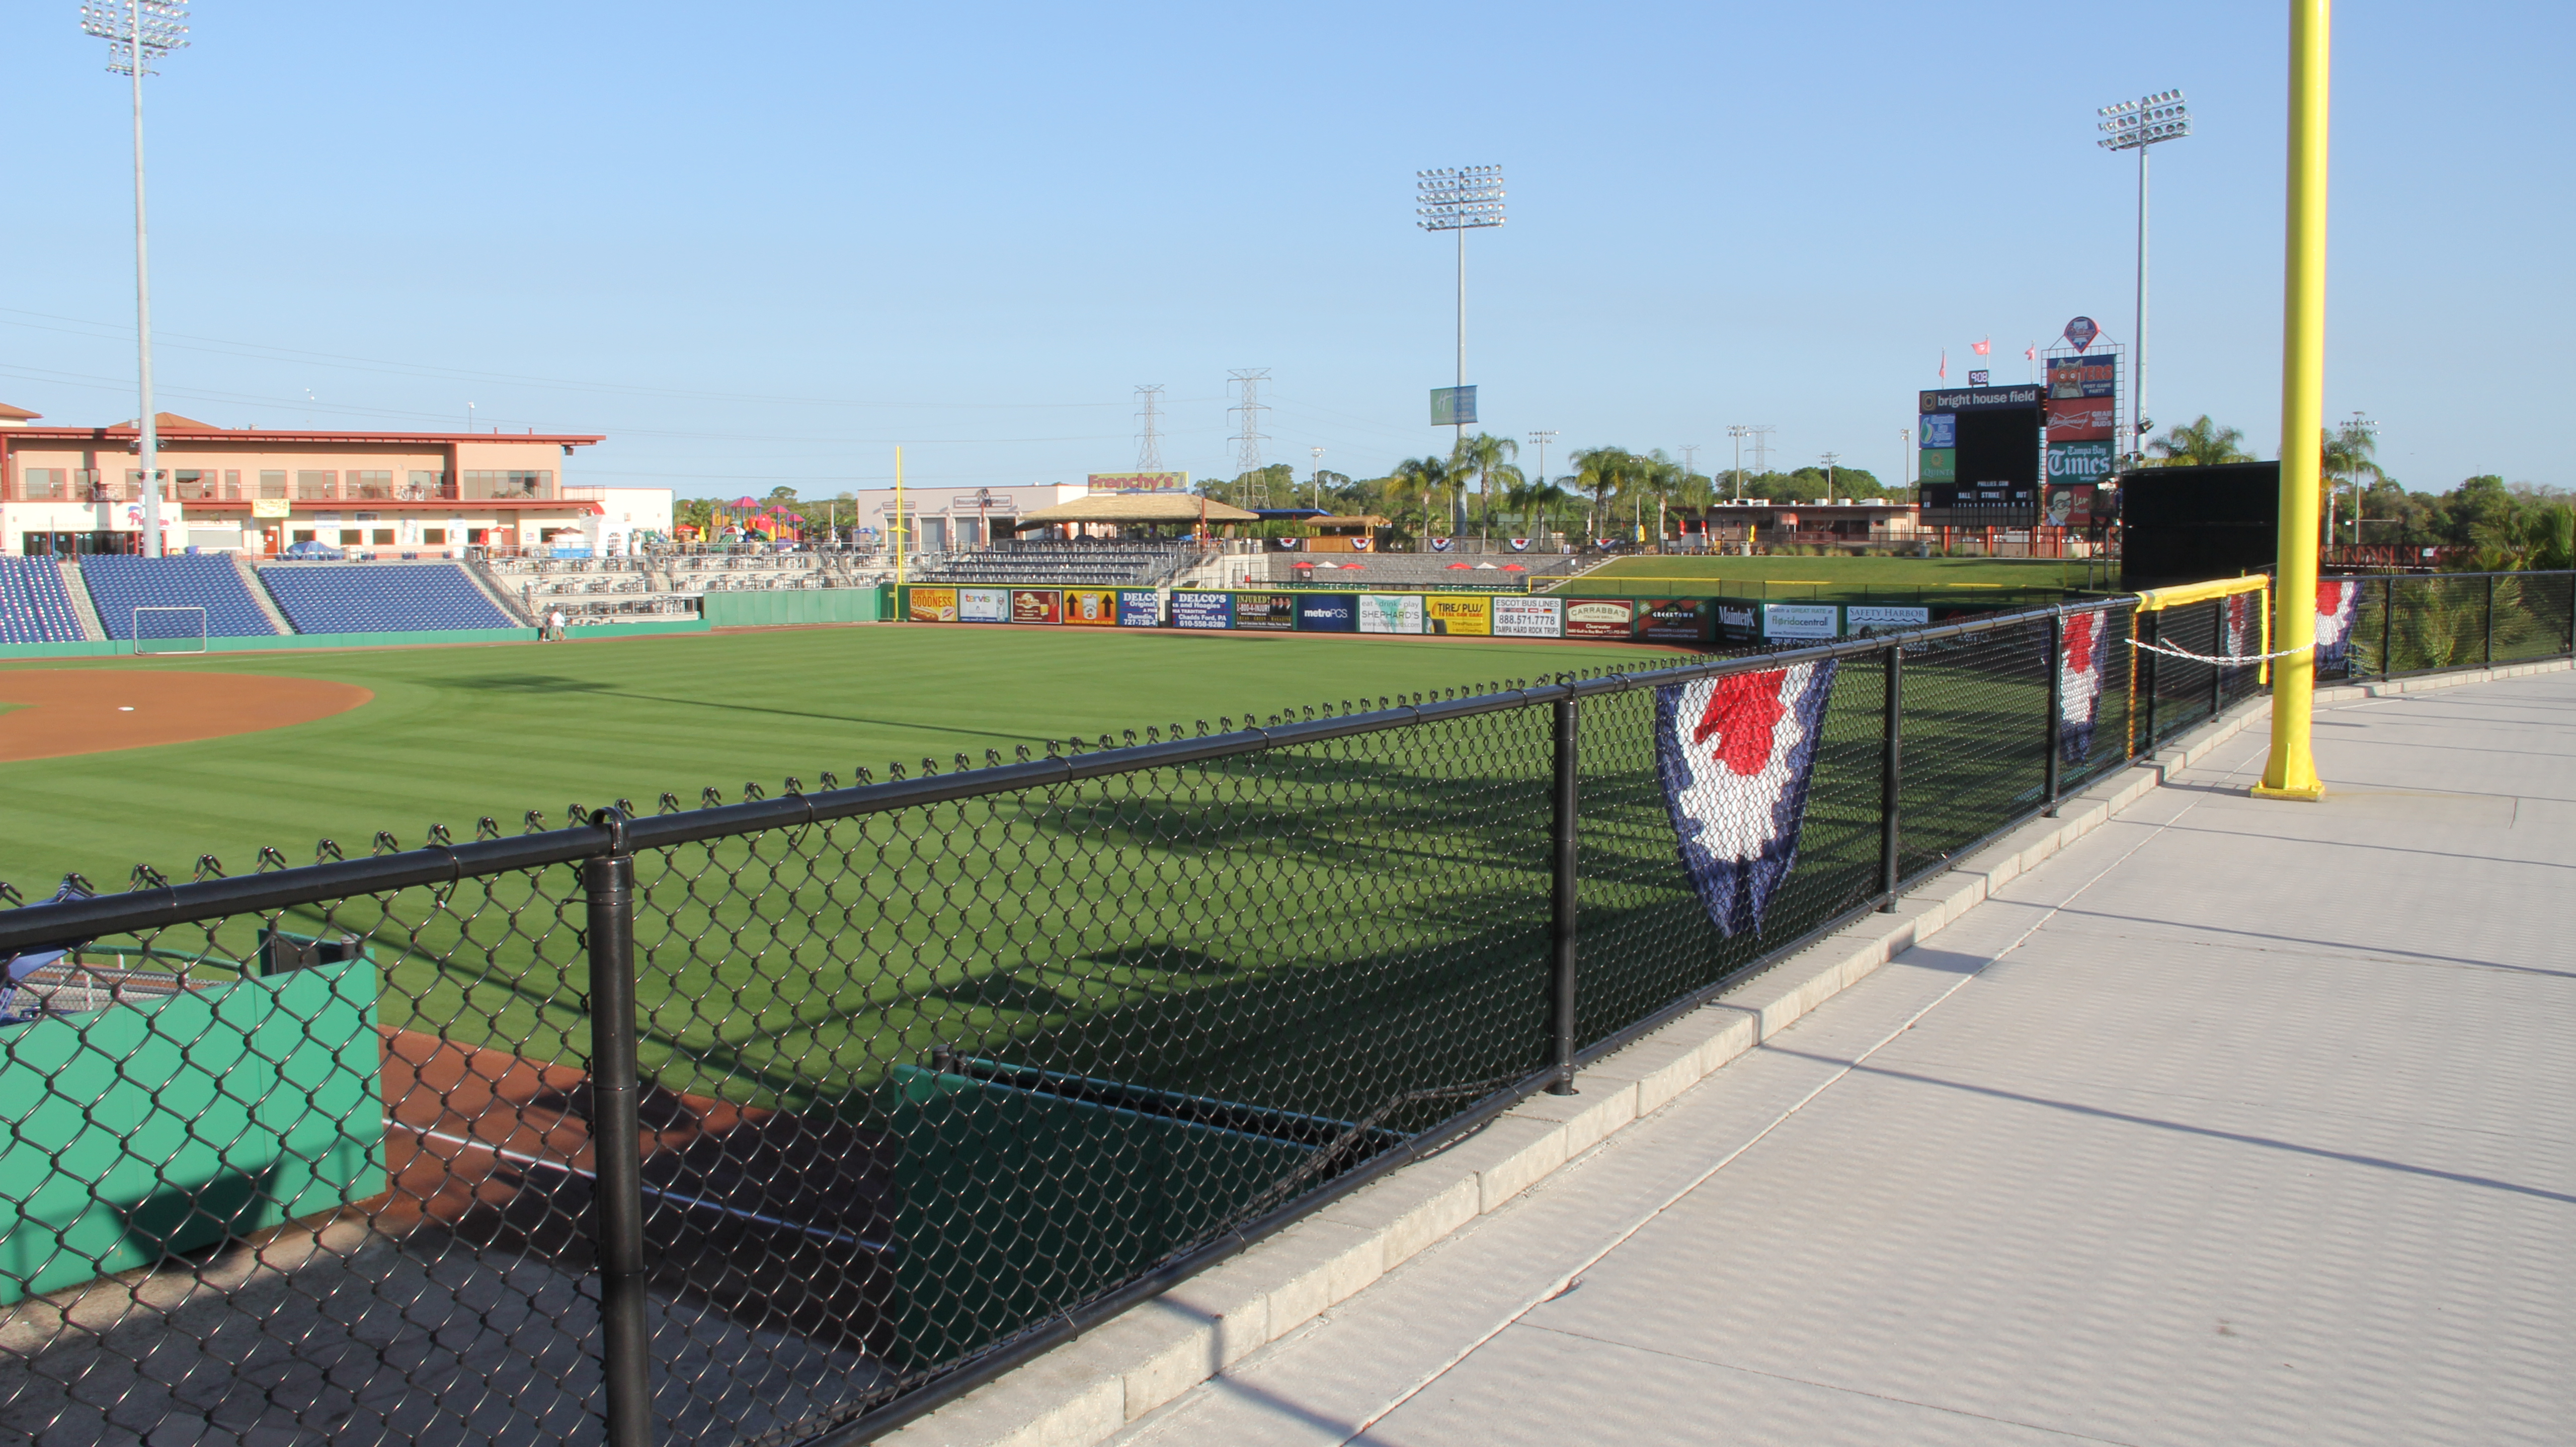 The 2020 Phillies Spring Training TV Schedule Is Here – NBC10